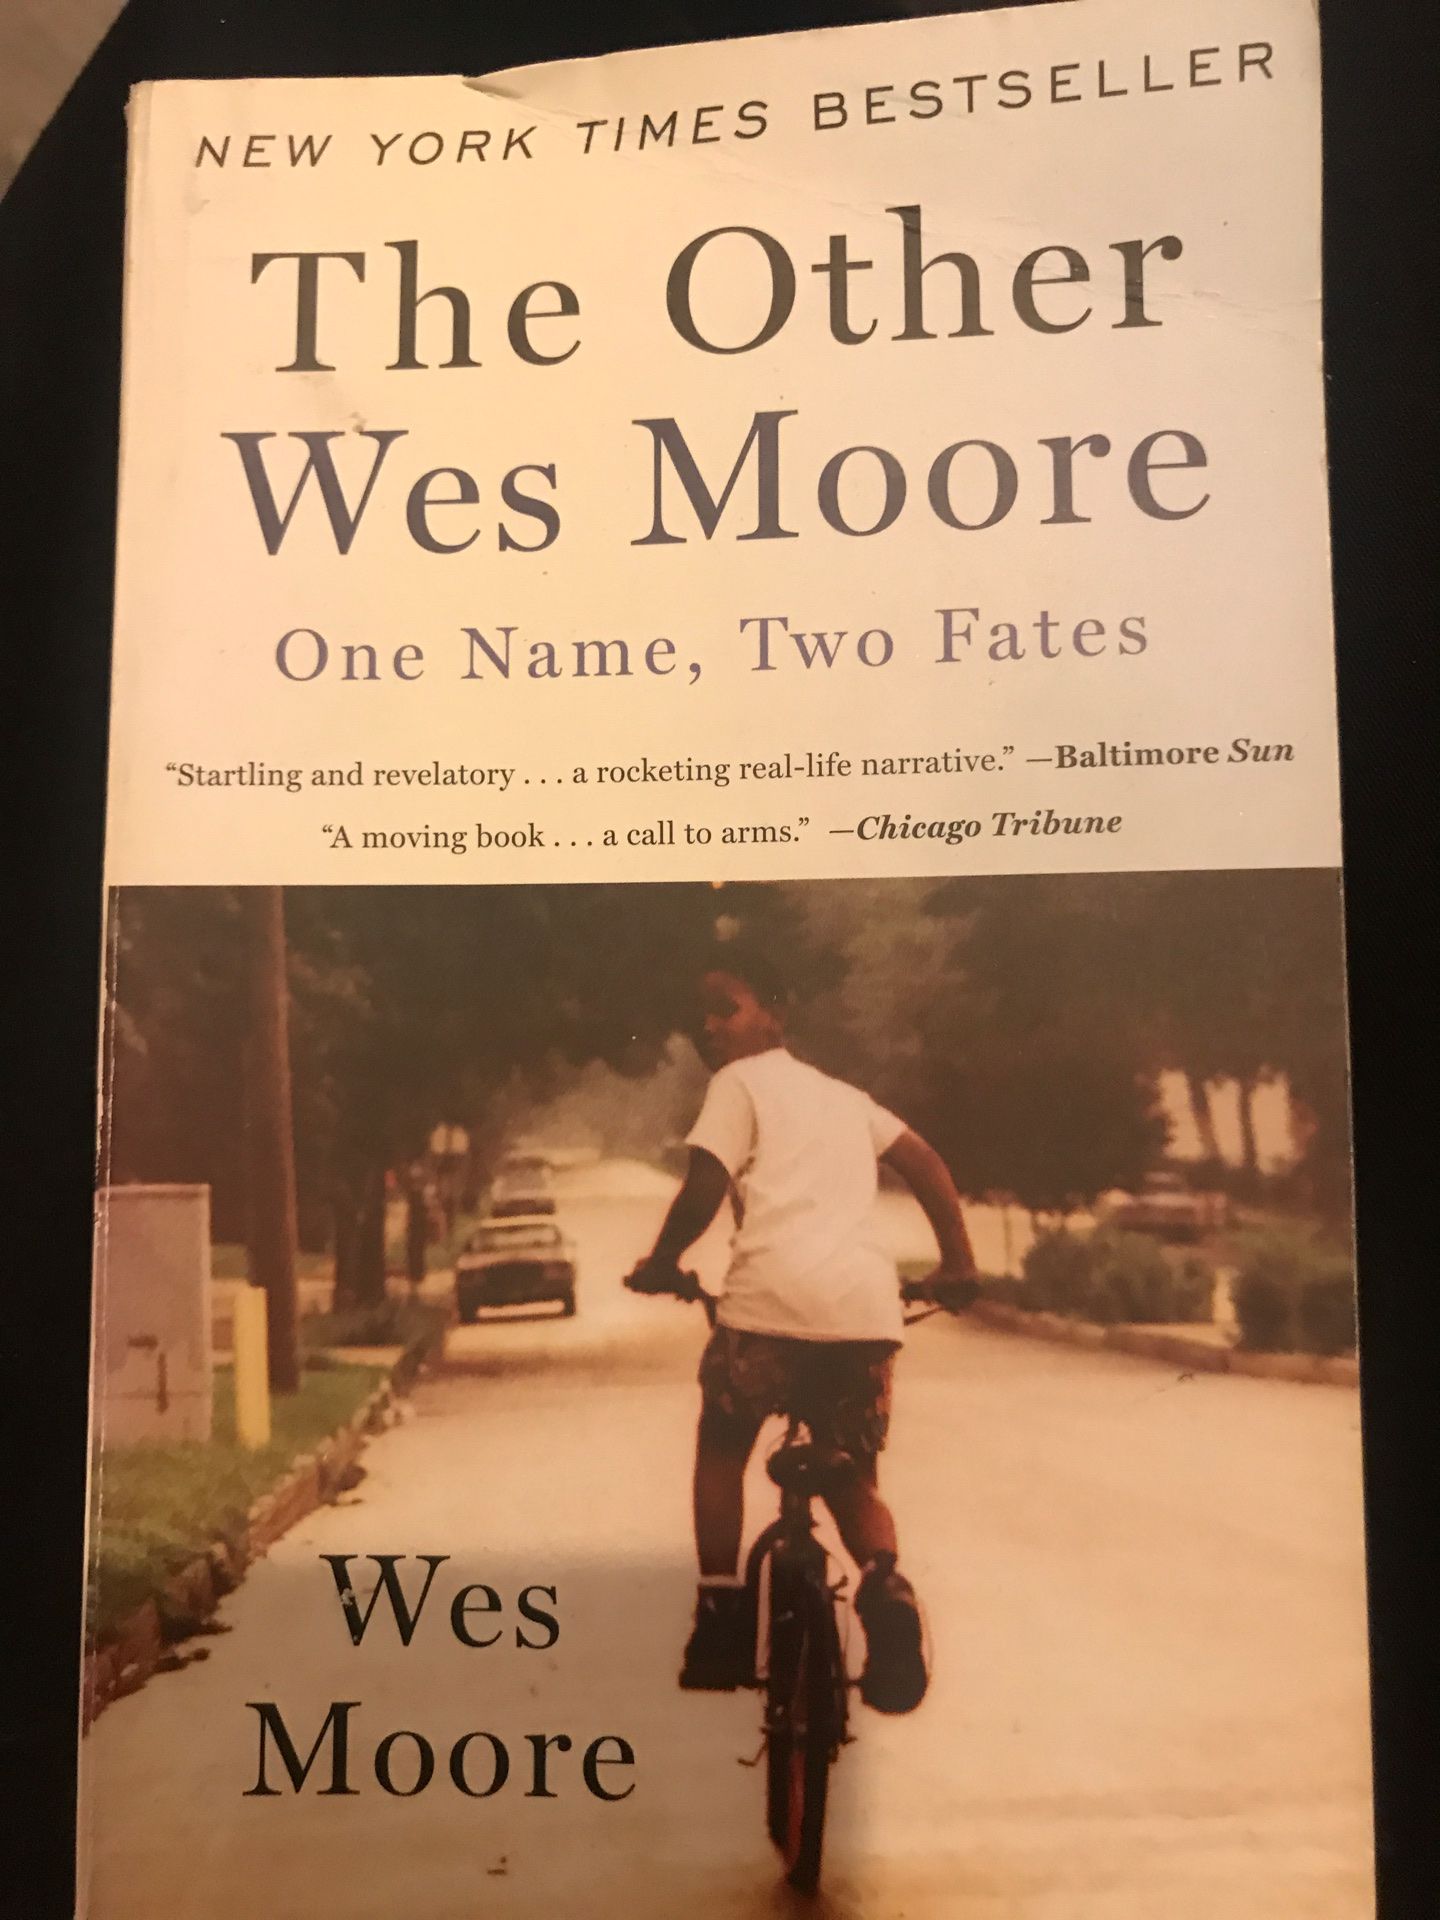 The other Wes Moore